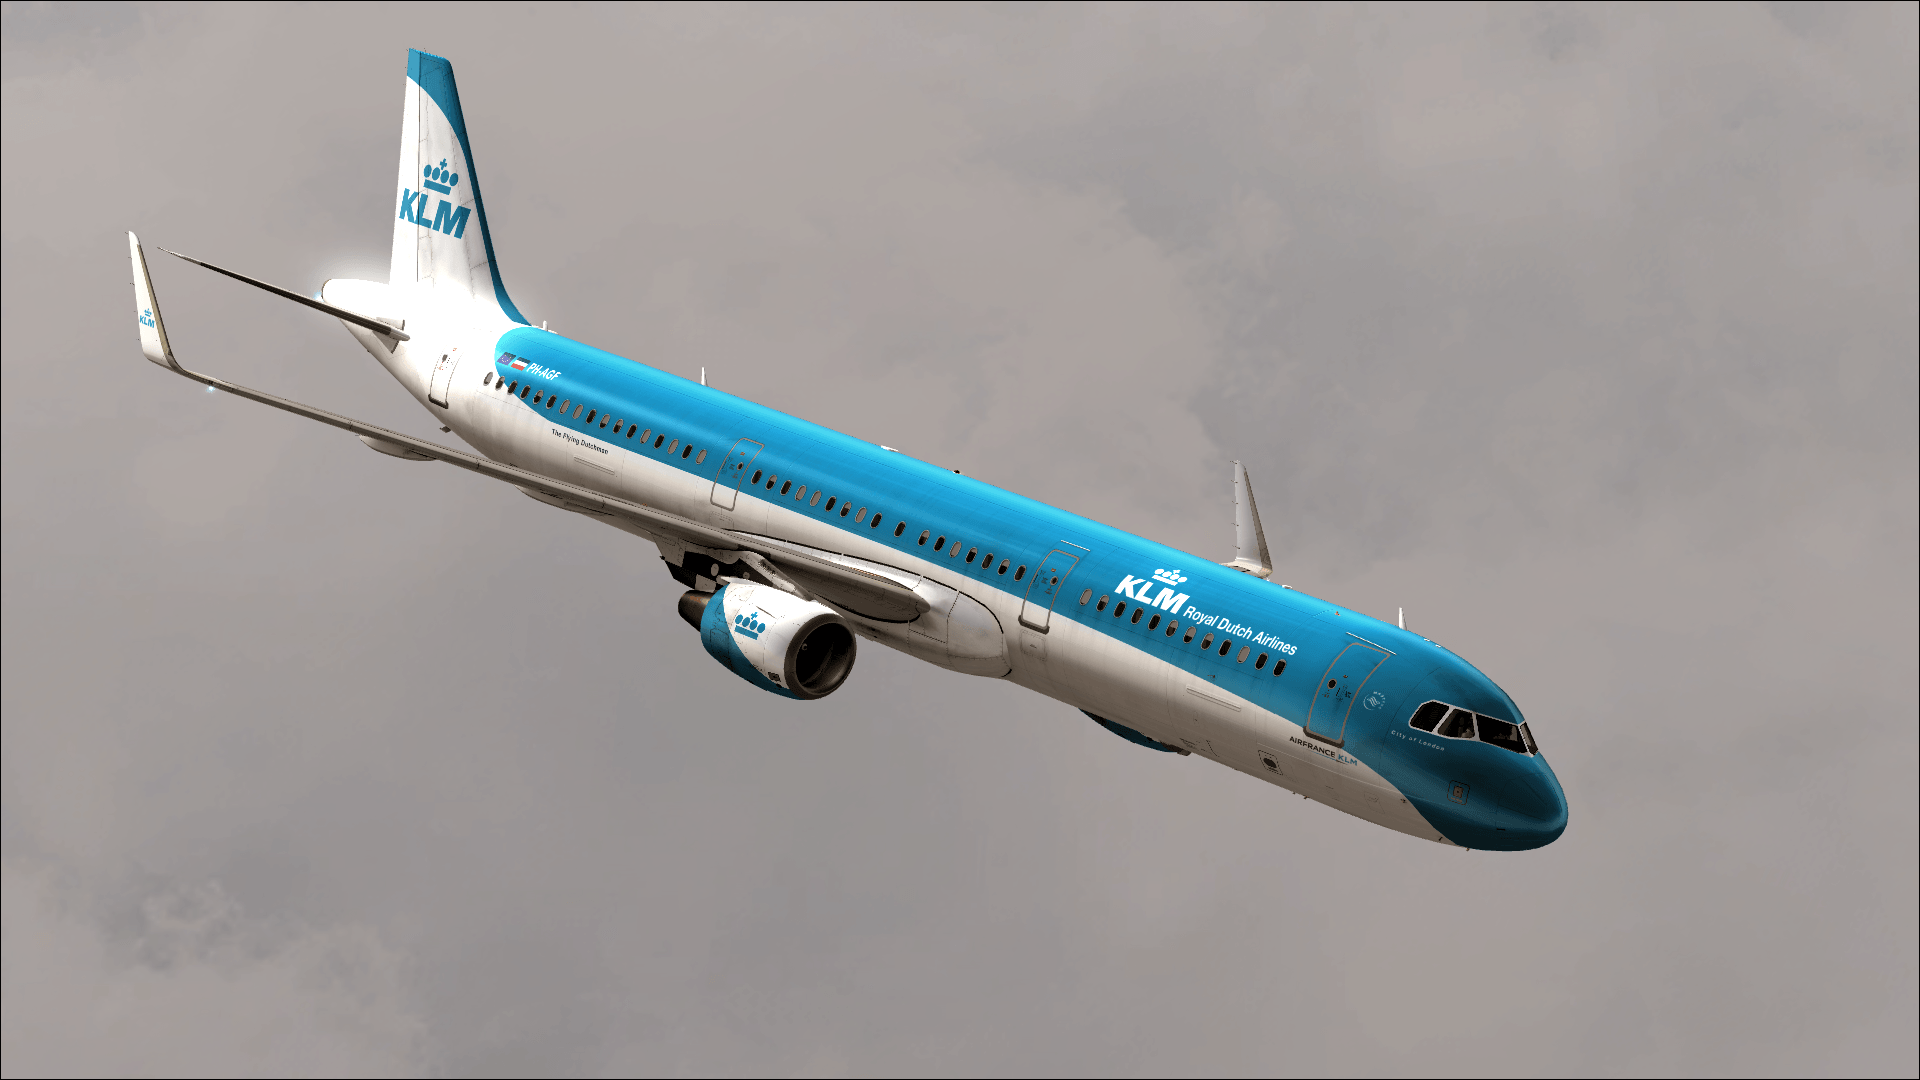 Airbus A321 200 Airline KLM Is Landing Wallpaper And Image